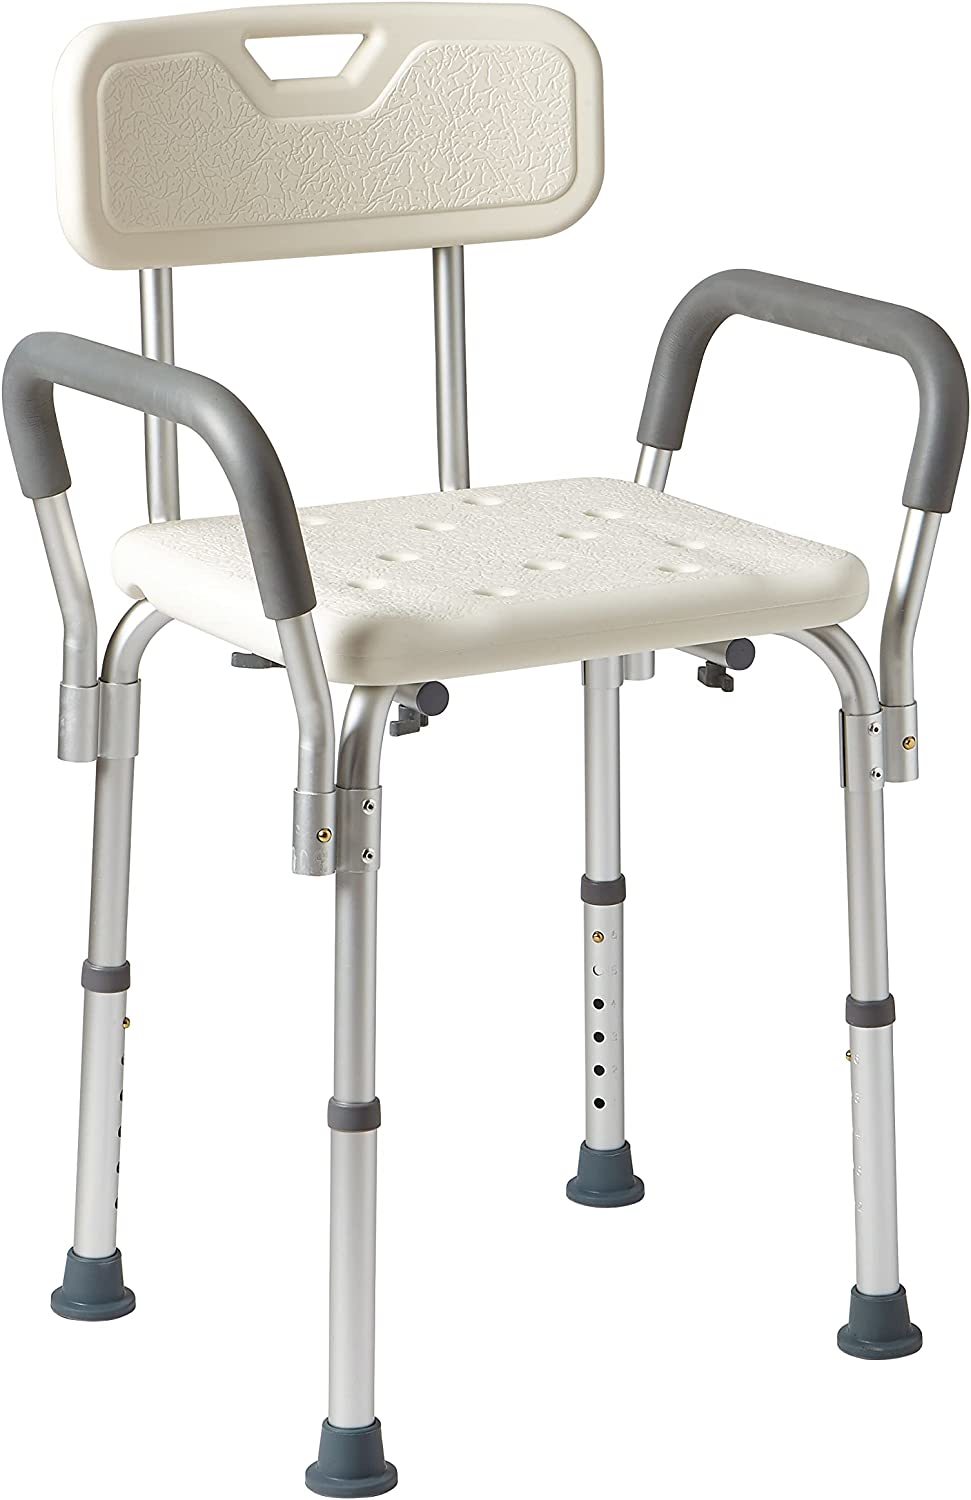 With Padded Armrests And A Back, The Medline Shower Chair Is A Great Bathtub - $54.92